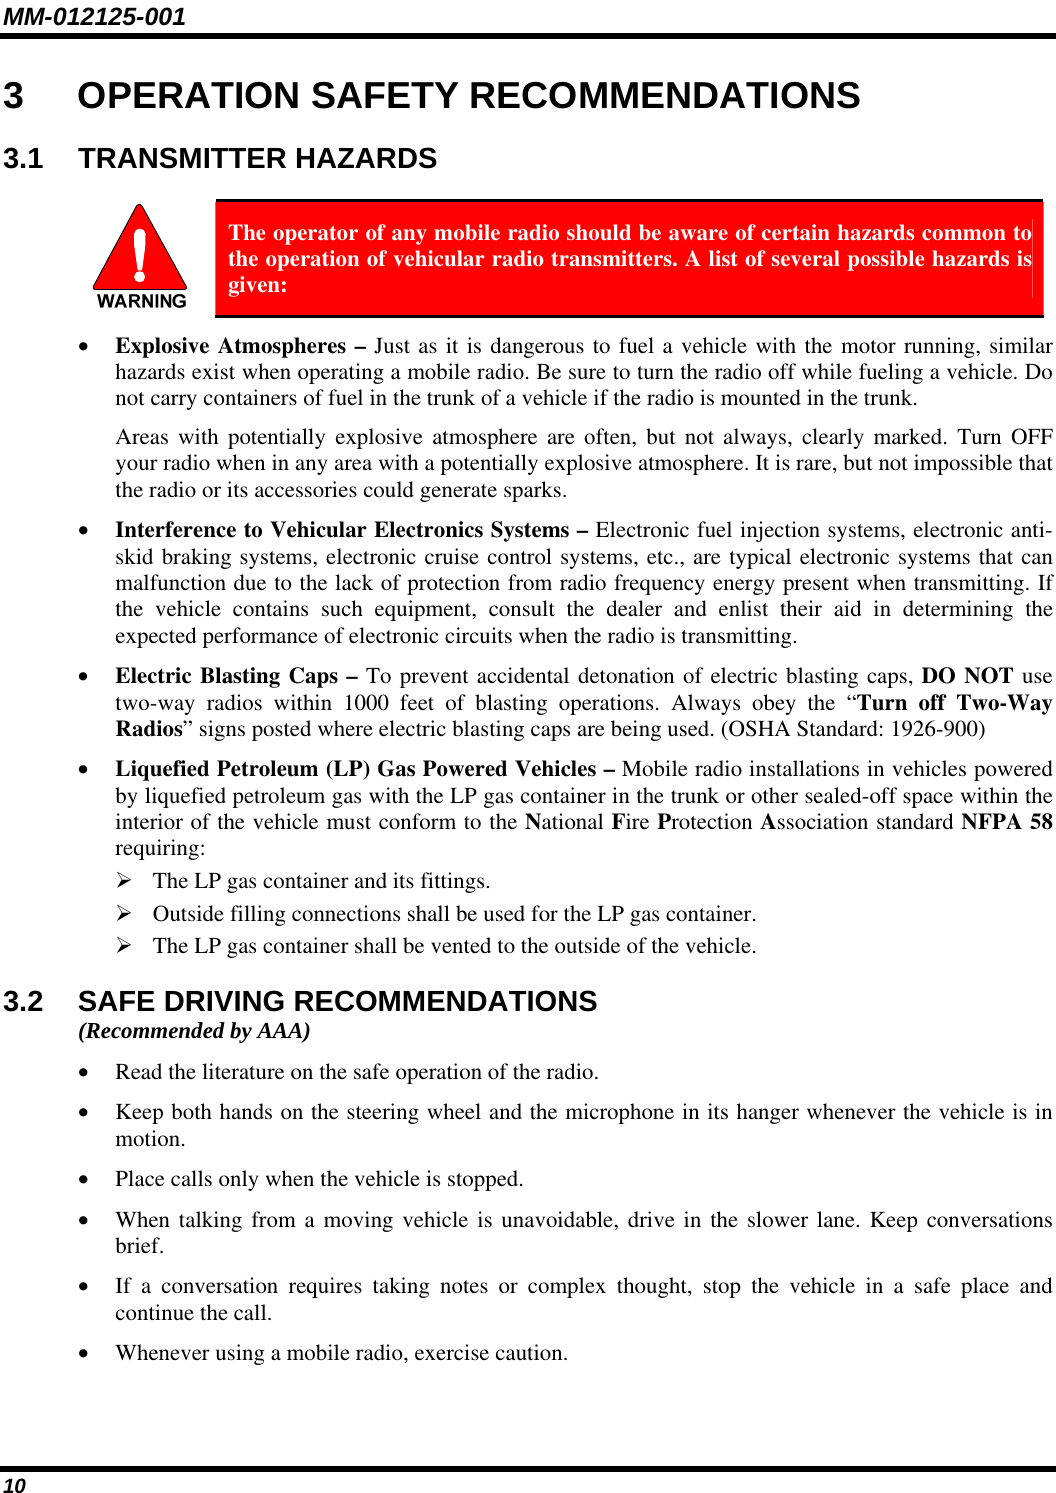 MM-012125-001 3 OPERATION SAFETY RECOMMENDATIONS 3.1 TRANSMITTER HAZARDS   The operator of any mobile radio should be aware of certain hazards common to the operation of vehicular radio transmitters. A list of several possible hazards is given: • Explosive Atmospheres – Just as it is dangerous to fuel a vehicle with the motor running, similar hazards exist when operating a mobile radio. Be sure to turn the radio off while fueling a vehicle. Do not carry containers of fuel in the trunk of a vehicle if the radio is mounted in the trunk. Areas with potentially explosive atmosphere are often, but not always, clearly marked. Turn OFF your radio when in any area with a potentially explosive atmosphere. It is rare, but not impossible that the radio or its accessories could generate sparks. • Interference to Vehicular Electronics Systems – Electronic fuel injection systems, electronic anti-skid braking systems, electronic cruise control systems, etc., are typical electronic systems that can malfunction due to the lack of protection from radio frequency energy present when transmitting. If the vehicle contains such equipment, consult the dealer and enlist their aid in determining the expected performance of electronic circuits when the radio is transmitting. • Electric Blasting Caps – To prevent accidental detonation of electric blasting caps, DO NOT use two-way radios within 1000 feet of blasting operations. Always obey the “Turn off Two-Way Radios” signs posted where electric blasting caps are being used. (OSHA Standard: 1926-900) • Liquefied Petroleum (LP) Gas Powered Vehicles – Mobile radio installations in vehicles powered by liquefied petroleum gas with the LP gas container in the trunk or other sealed-off space within the interior of the vehicle must conform to the National Fire Protection Association standard NFPA 58 requiring: ¾ The LP gas container and its fittings. ¾ Outside filling connections shall be used for the LP gas container. ¾ The LP gas container shall be vented to the outside of the vehicle. 3.2  SAFE DRIVING RECOMMENDATIONS (Recommended by AAA) • Read the literature on the safe operation of the radio. • Keep both hands on the steering wheel and the microphone in its hanger whenever the vehicle is in motion. • Place calls only when the vehicle is stopped. • When talking from a moving vehicle is unavoidable, drive in the slower lane. Keep conversations brief. • If a conversation requires taking notes or complex thought, stop the vehicle in a safe place and continue the call. • Whenever using a mobile radio, exercise caution. 10 